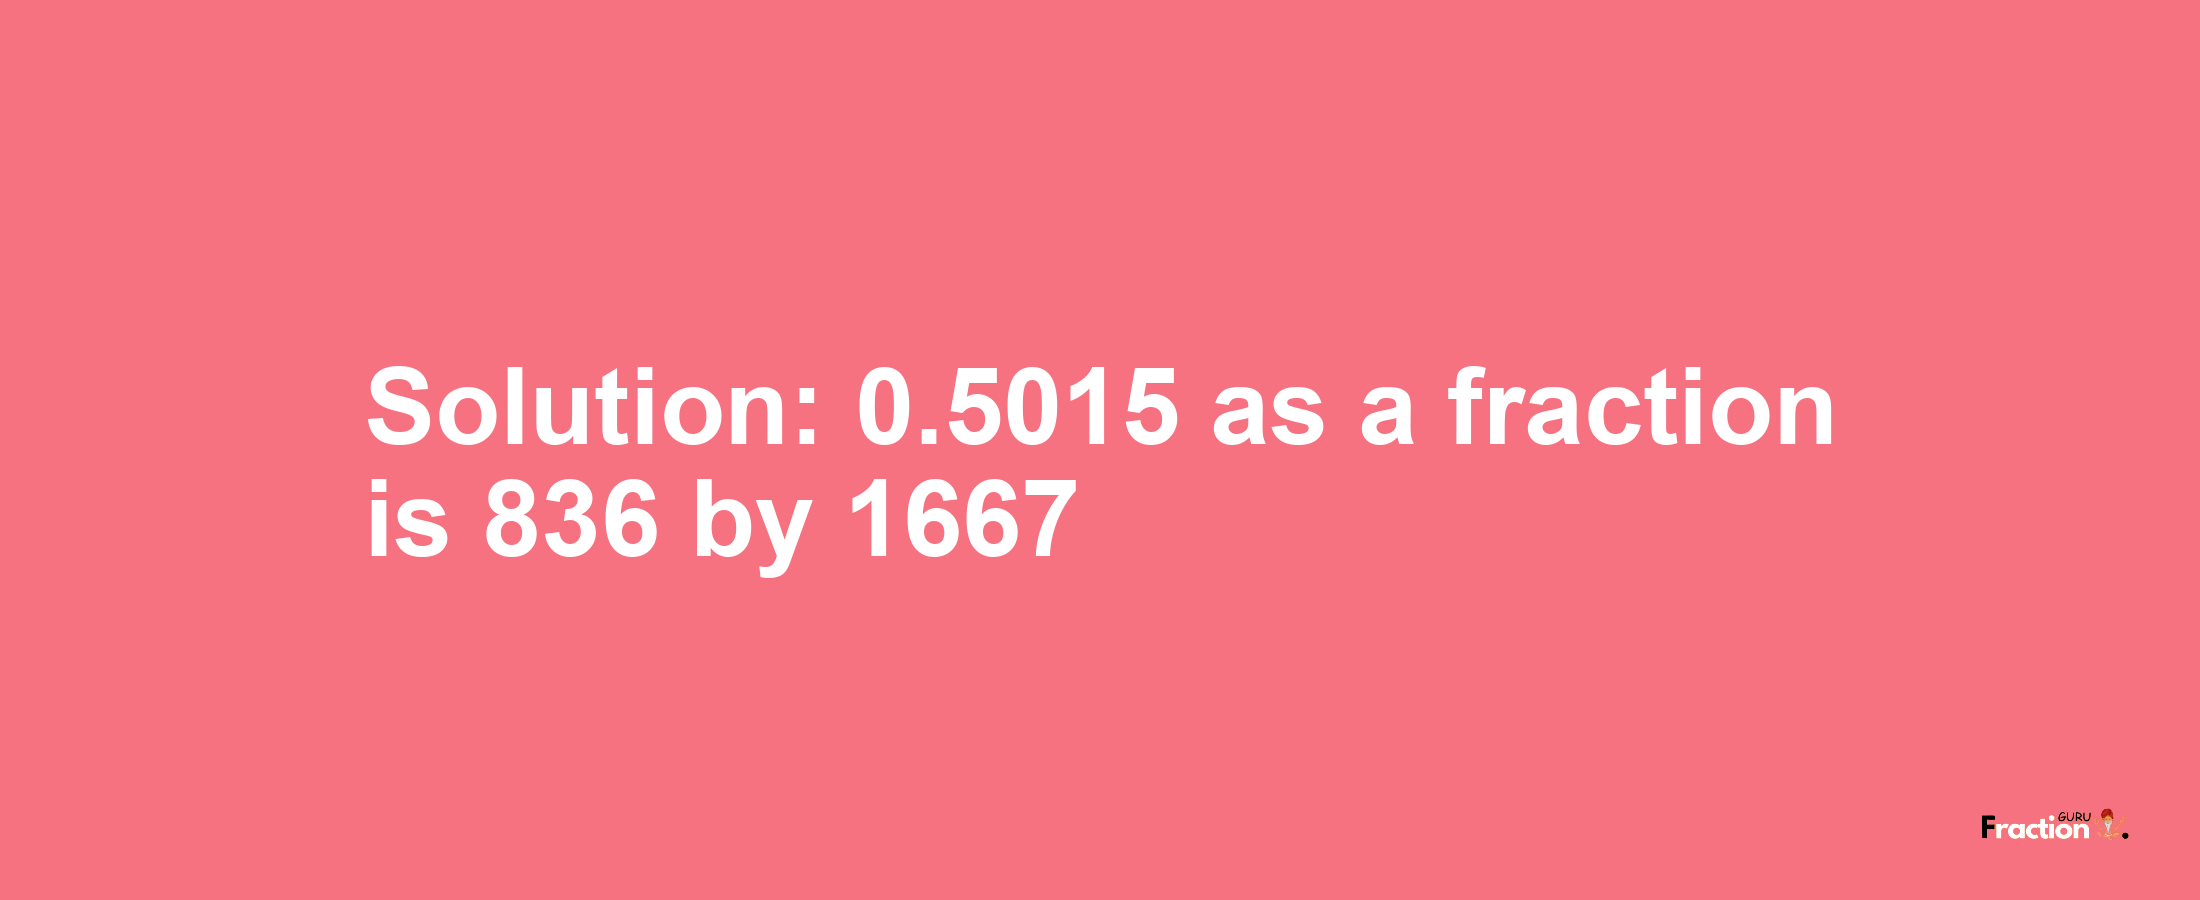 Solution:0.5015 as a fraction is 836/1667